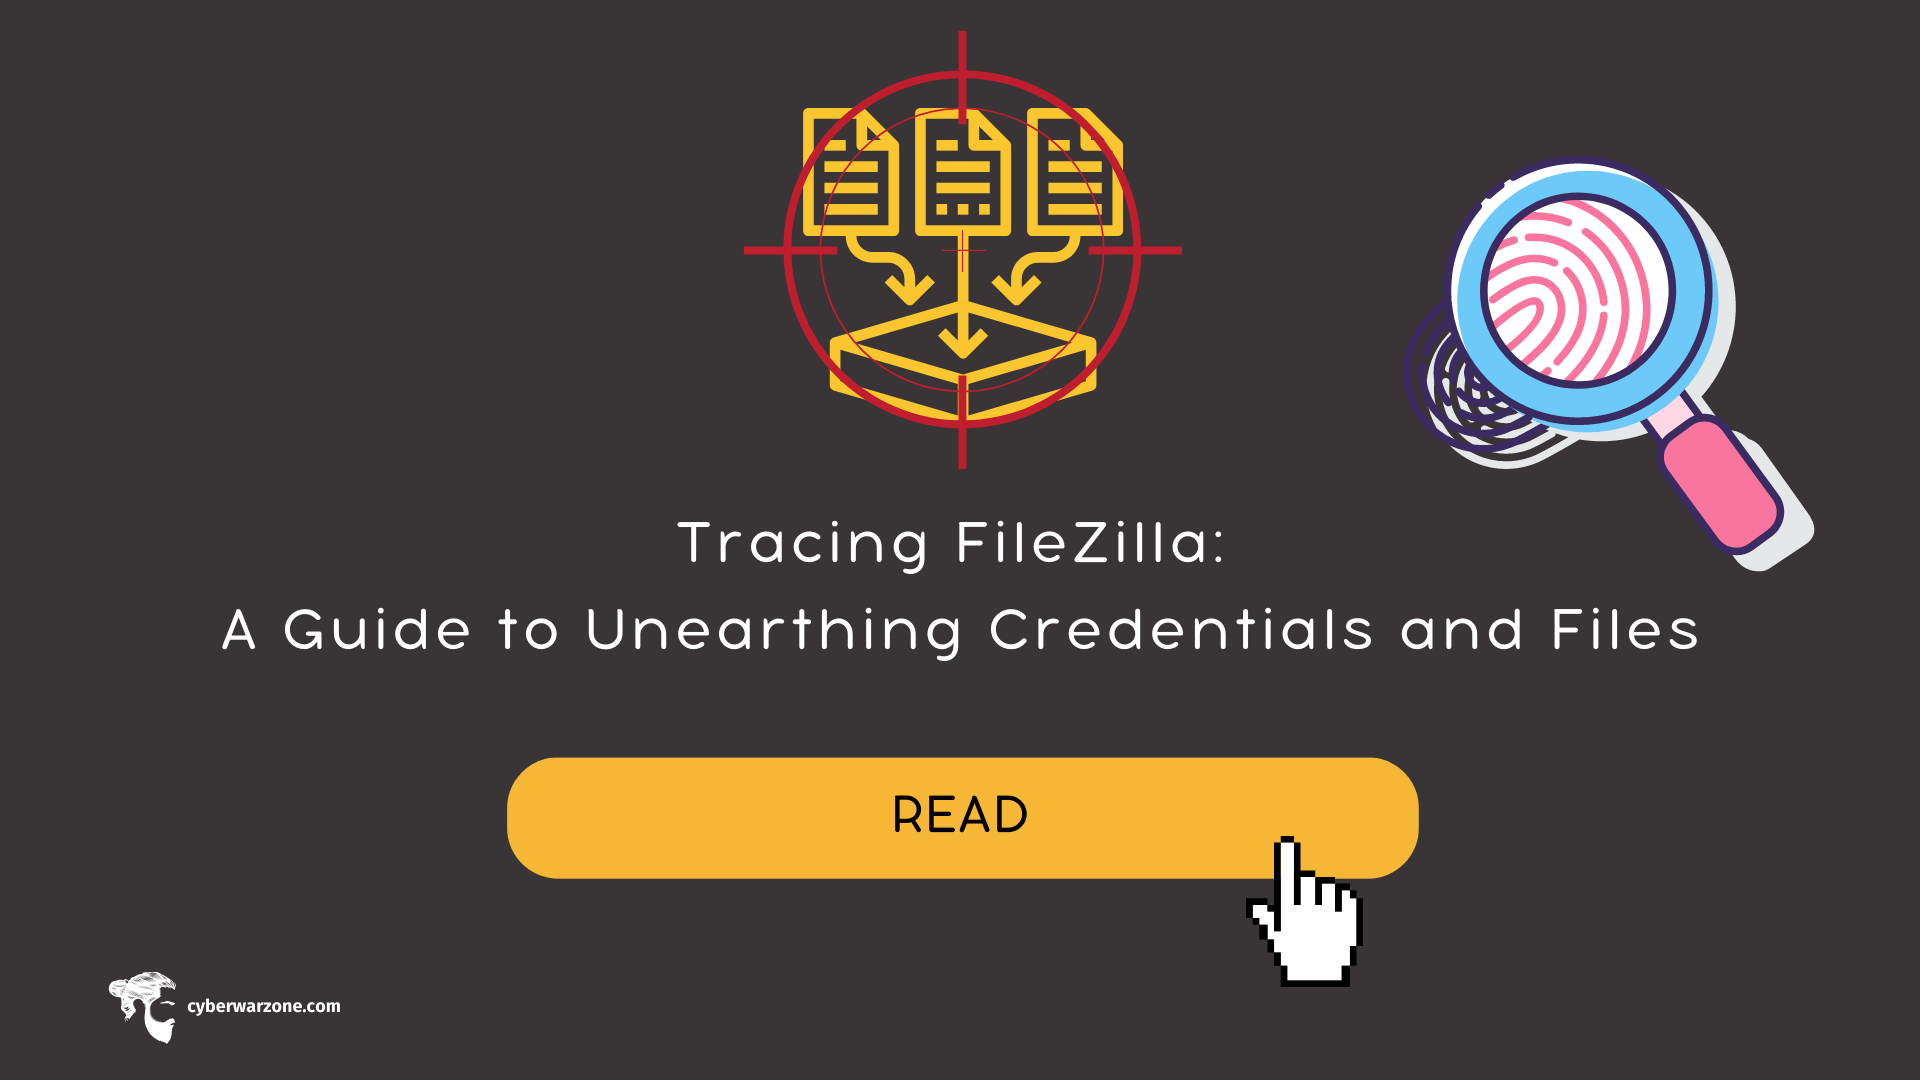 Tracing FileZilla: A Guide to Unearthing Credentials and Files